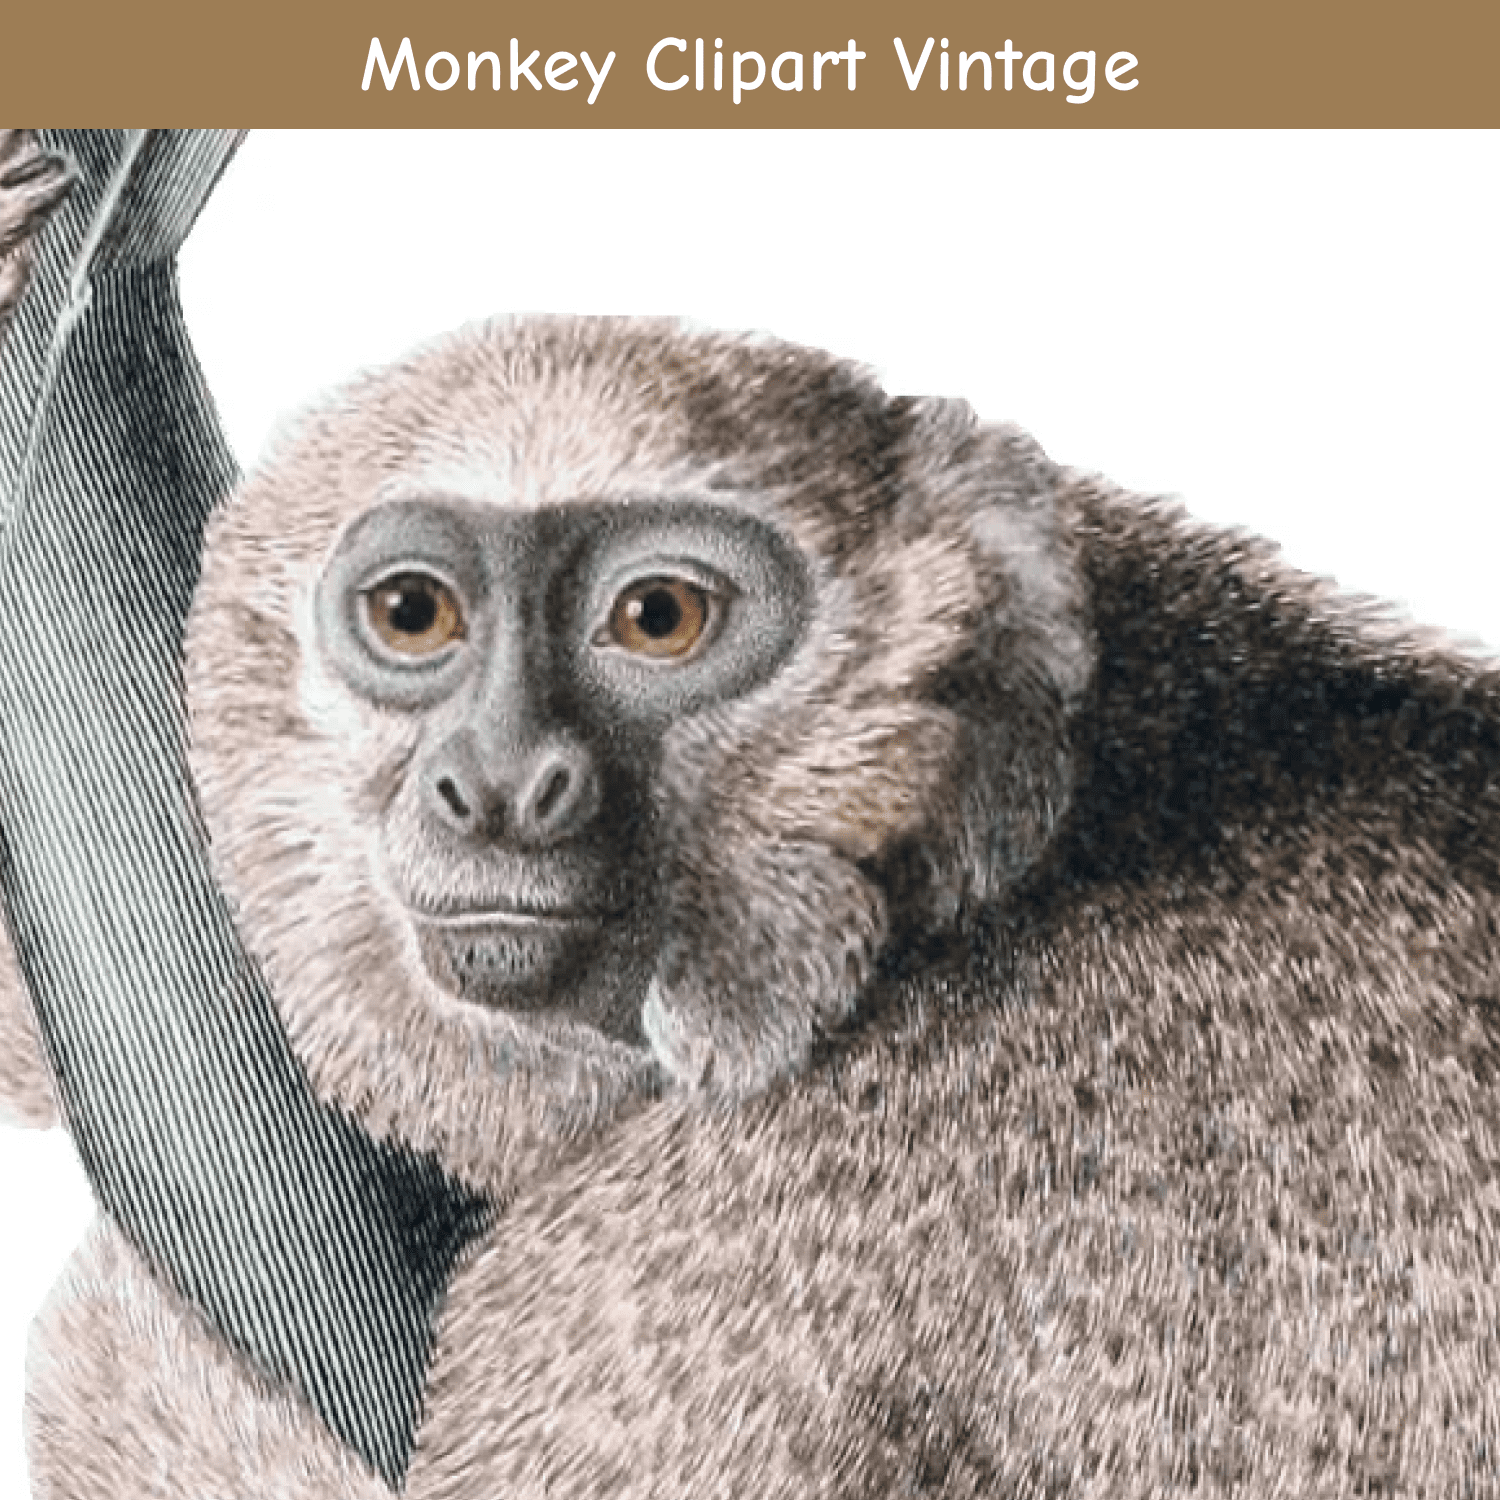 Save Monkey Clipart Vintage cover.